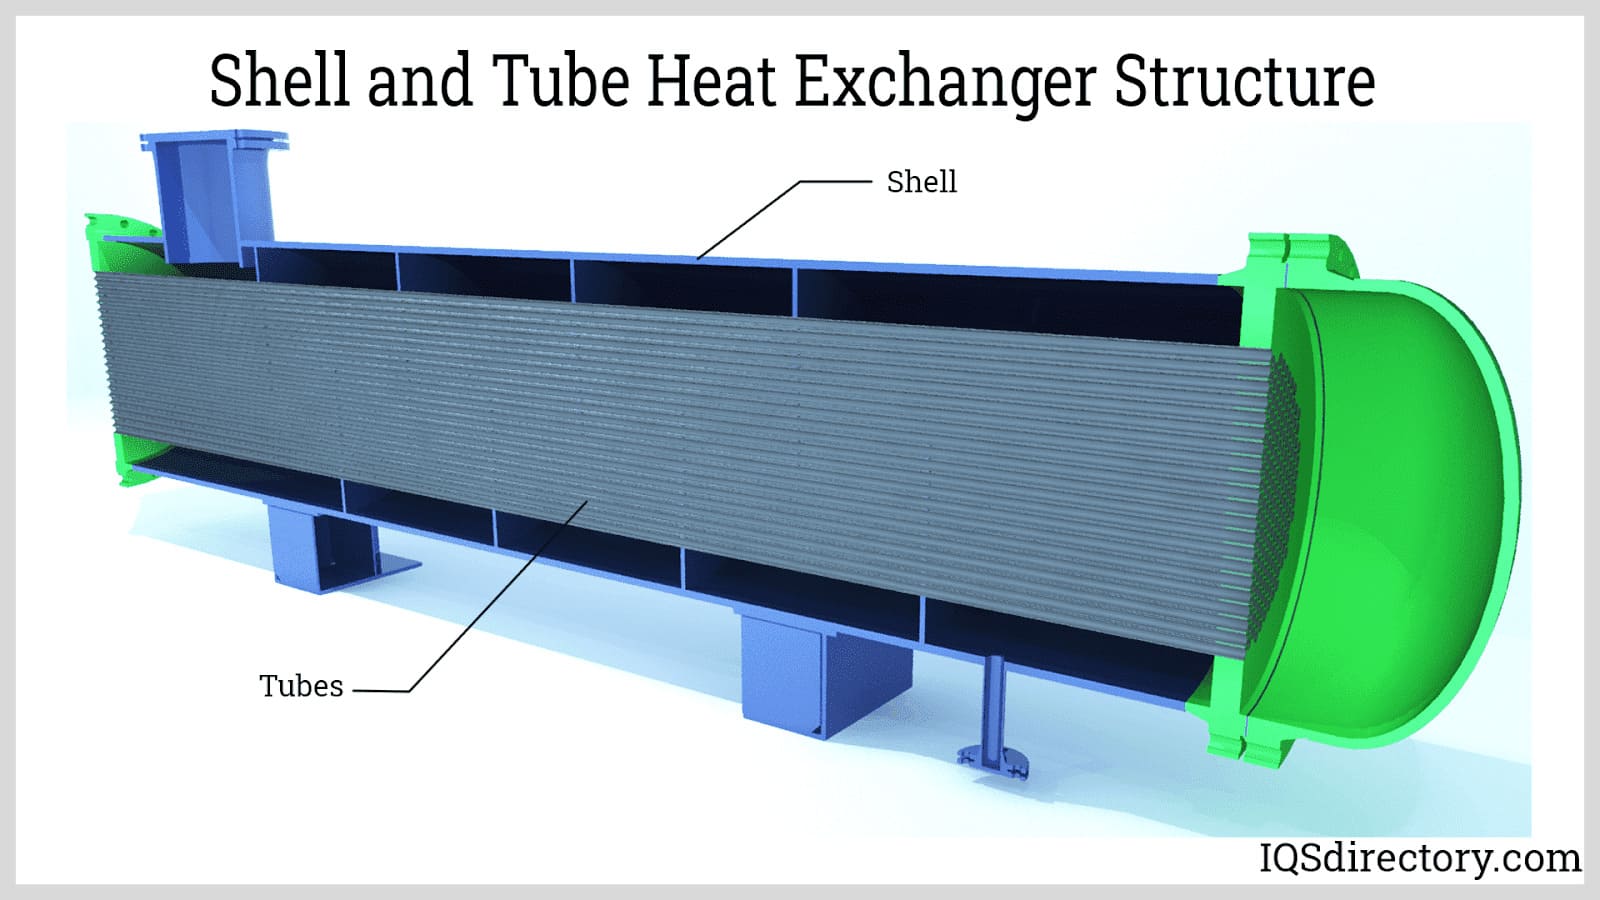 Shell and Tube Heat Exchanger Structure